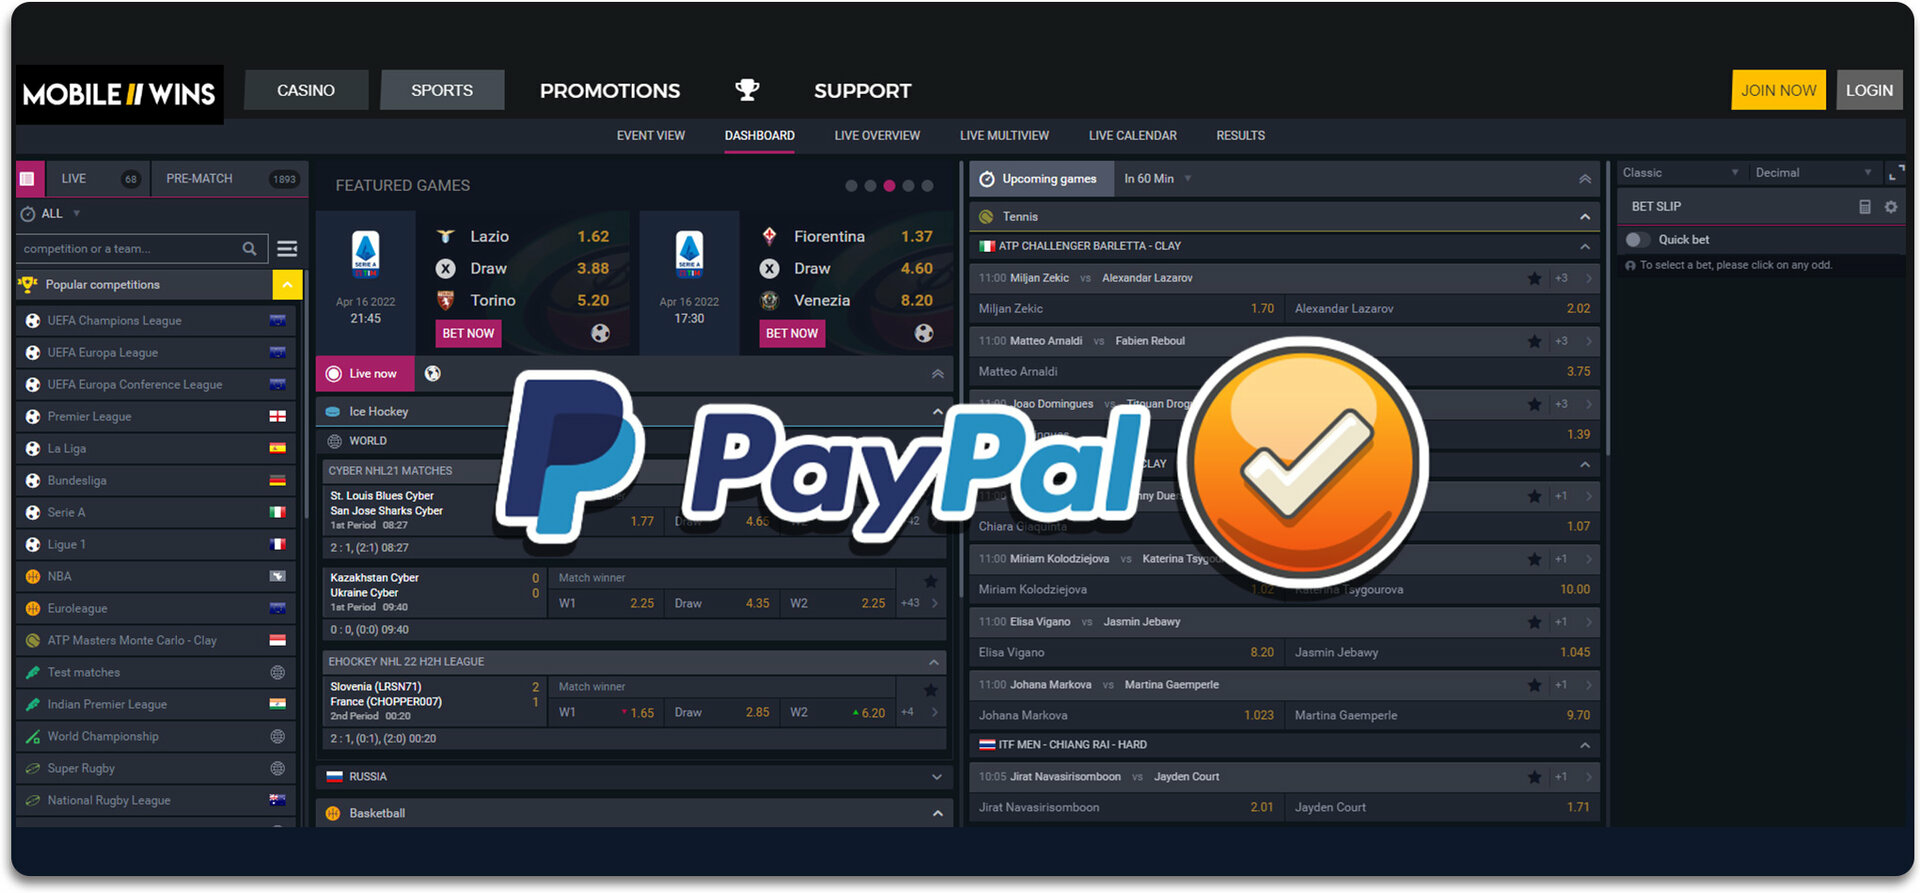 paypal betting sites mobilewins